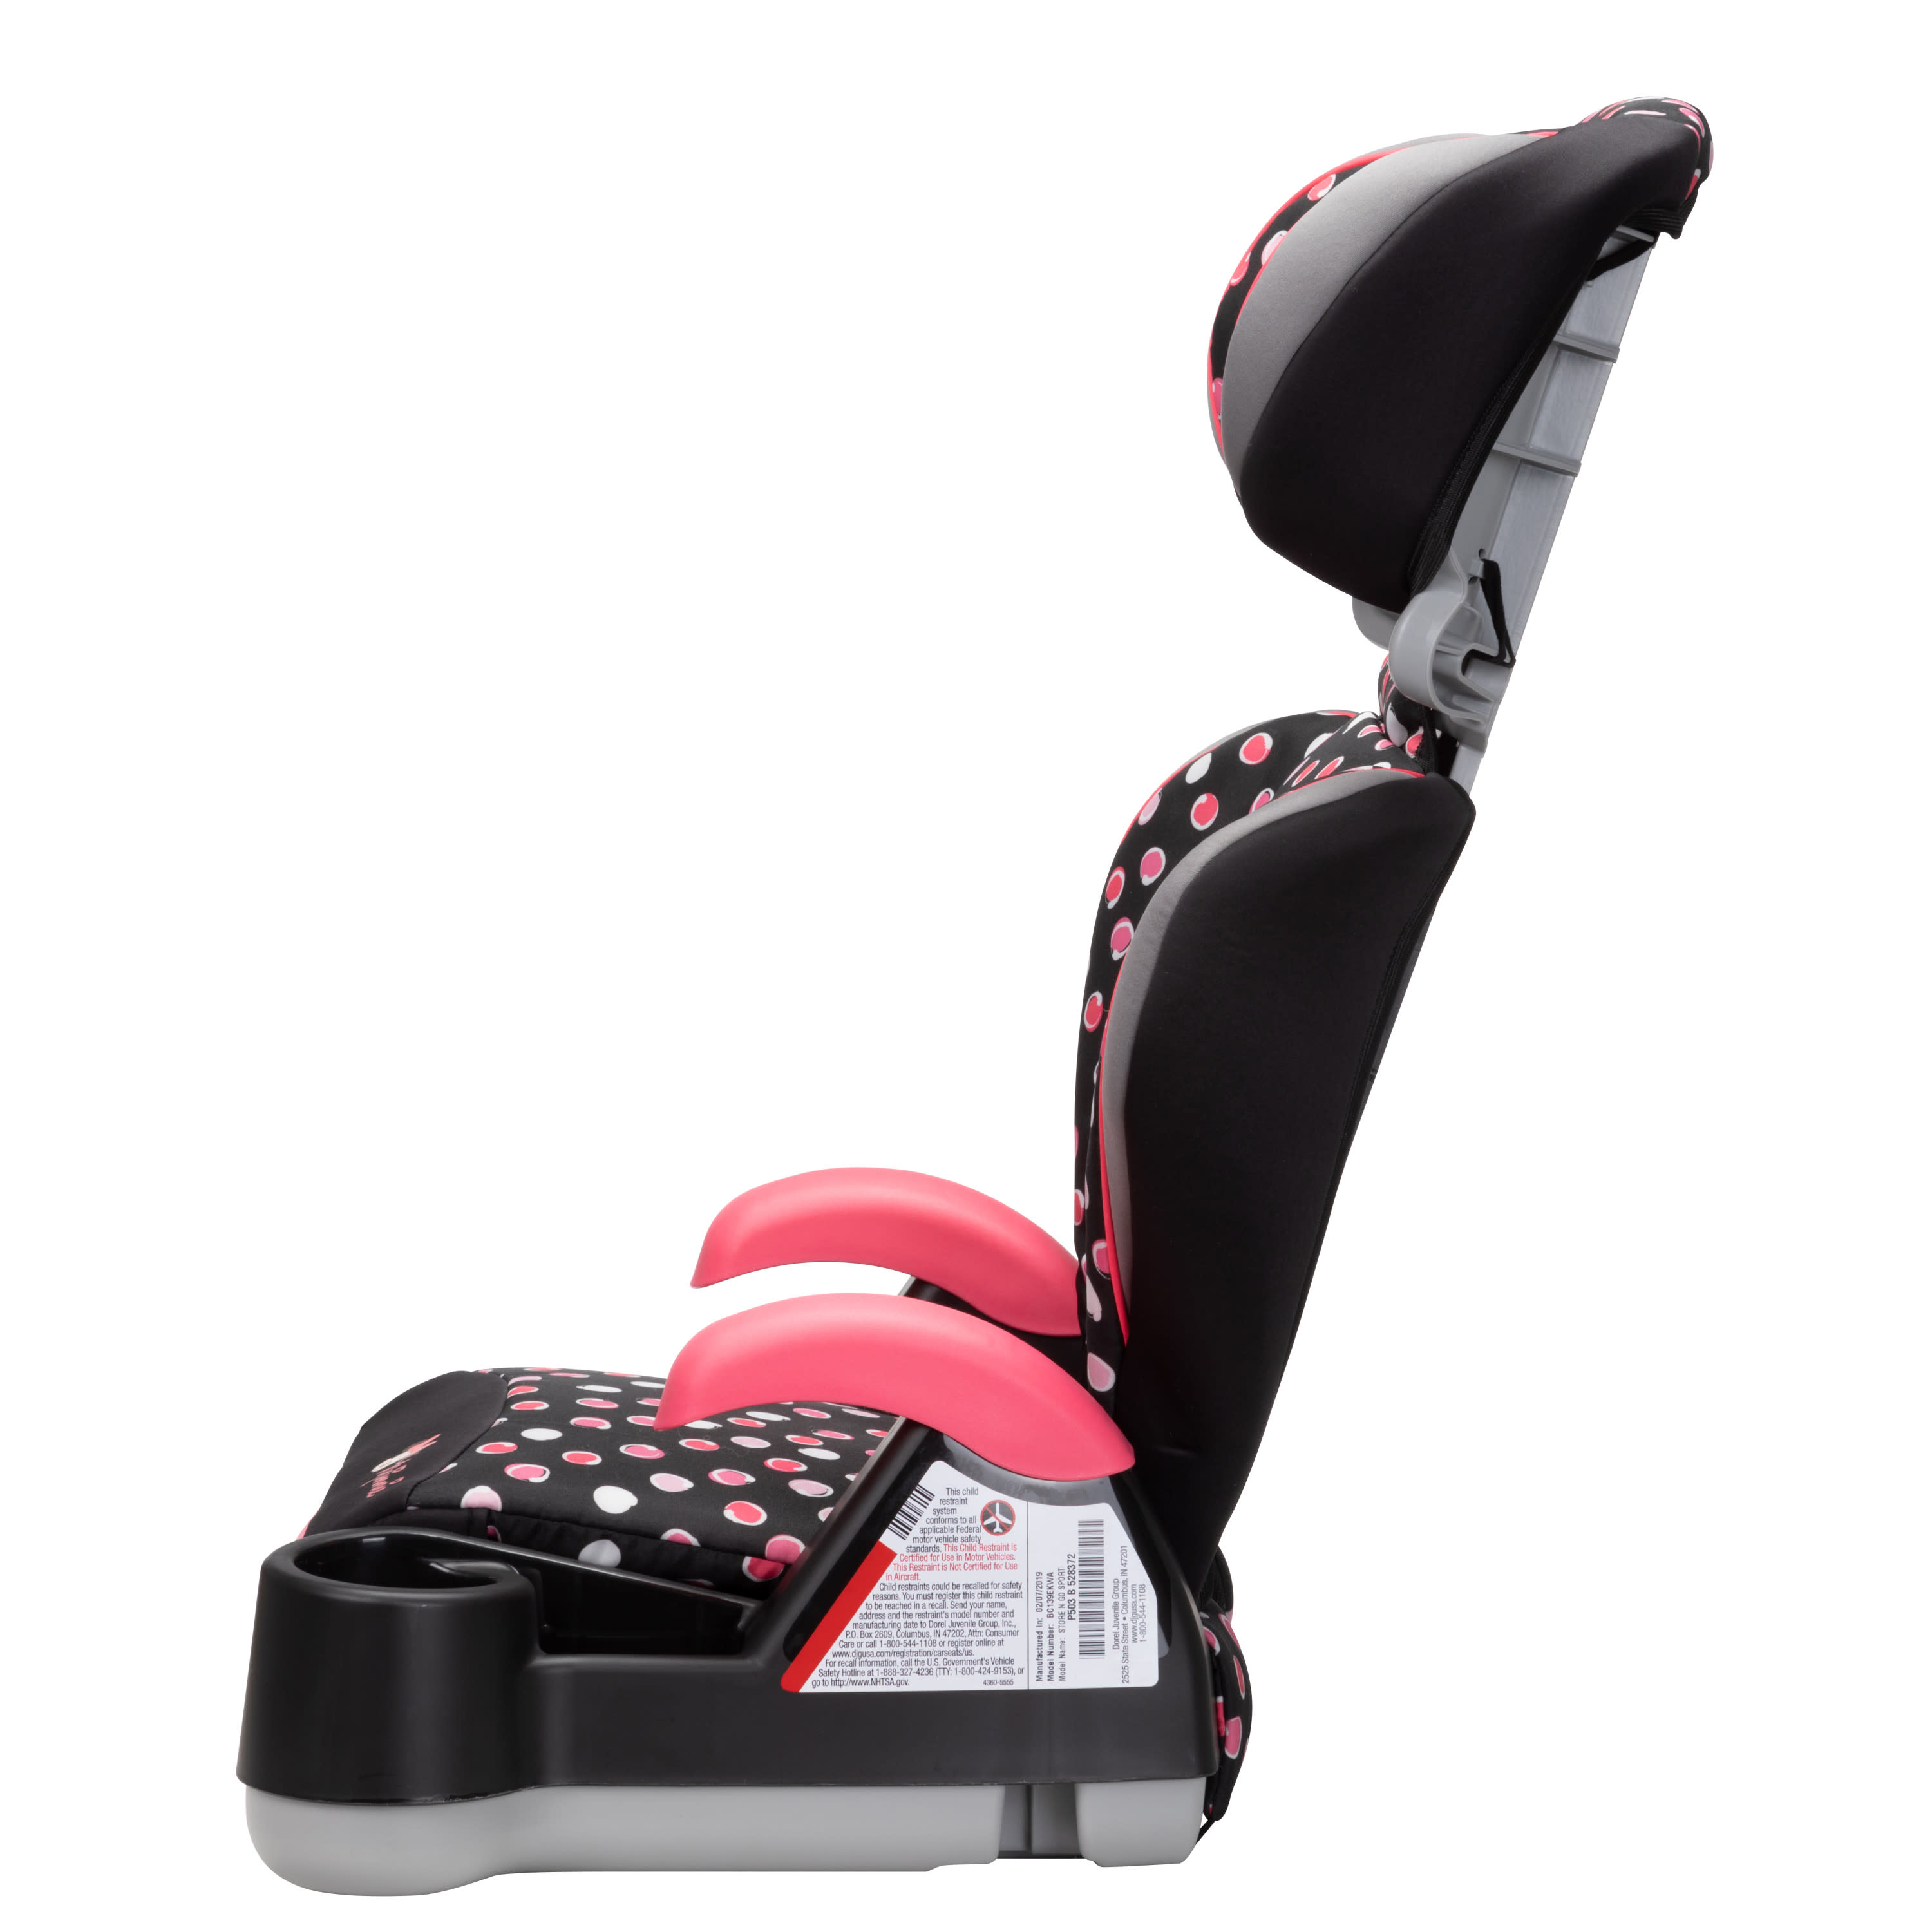 Disney Baby Store 'n Go Sport Booster Car Seat, Minnie Mash Up - image 21 of 21